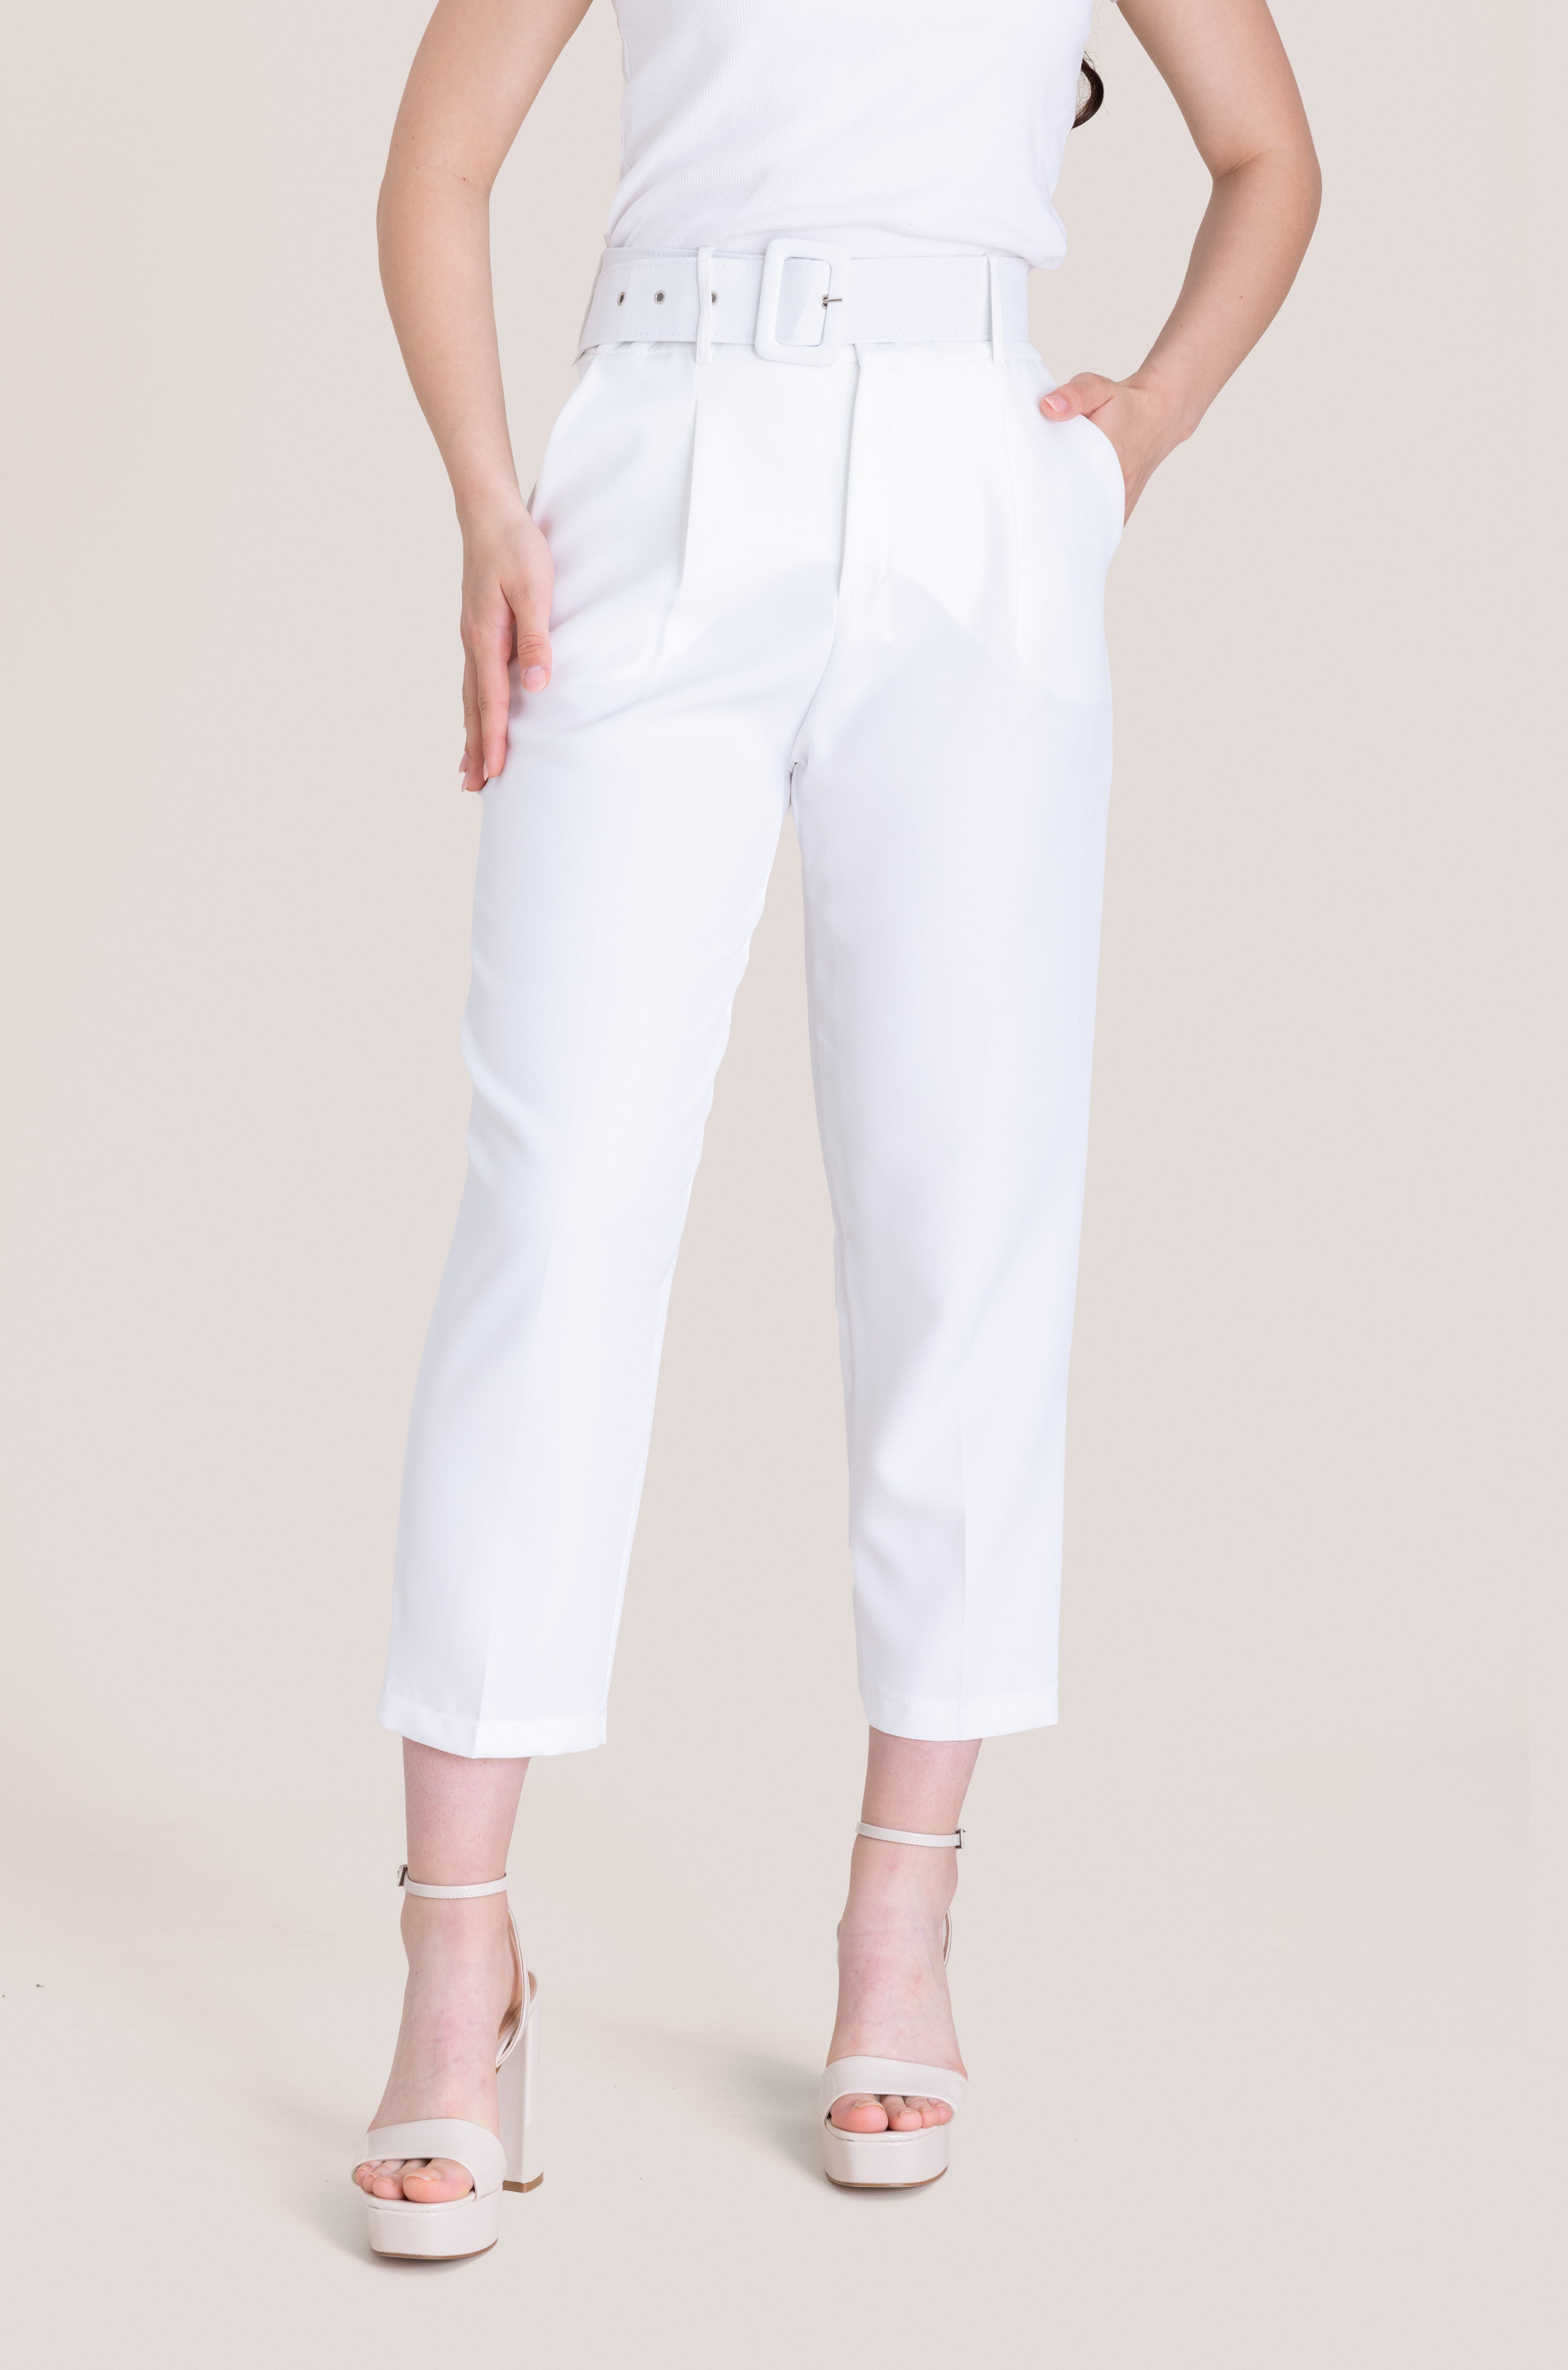 High-Waist Belted Casual Pant - Sandy Beige